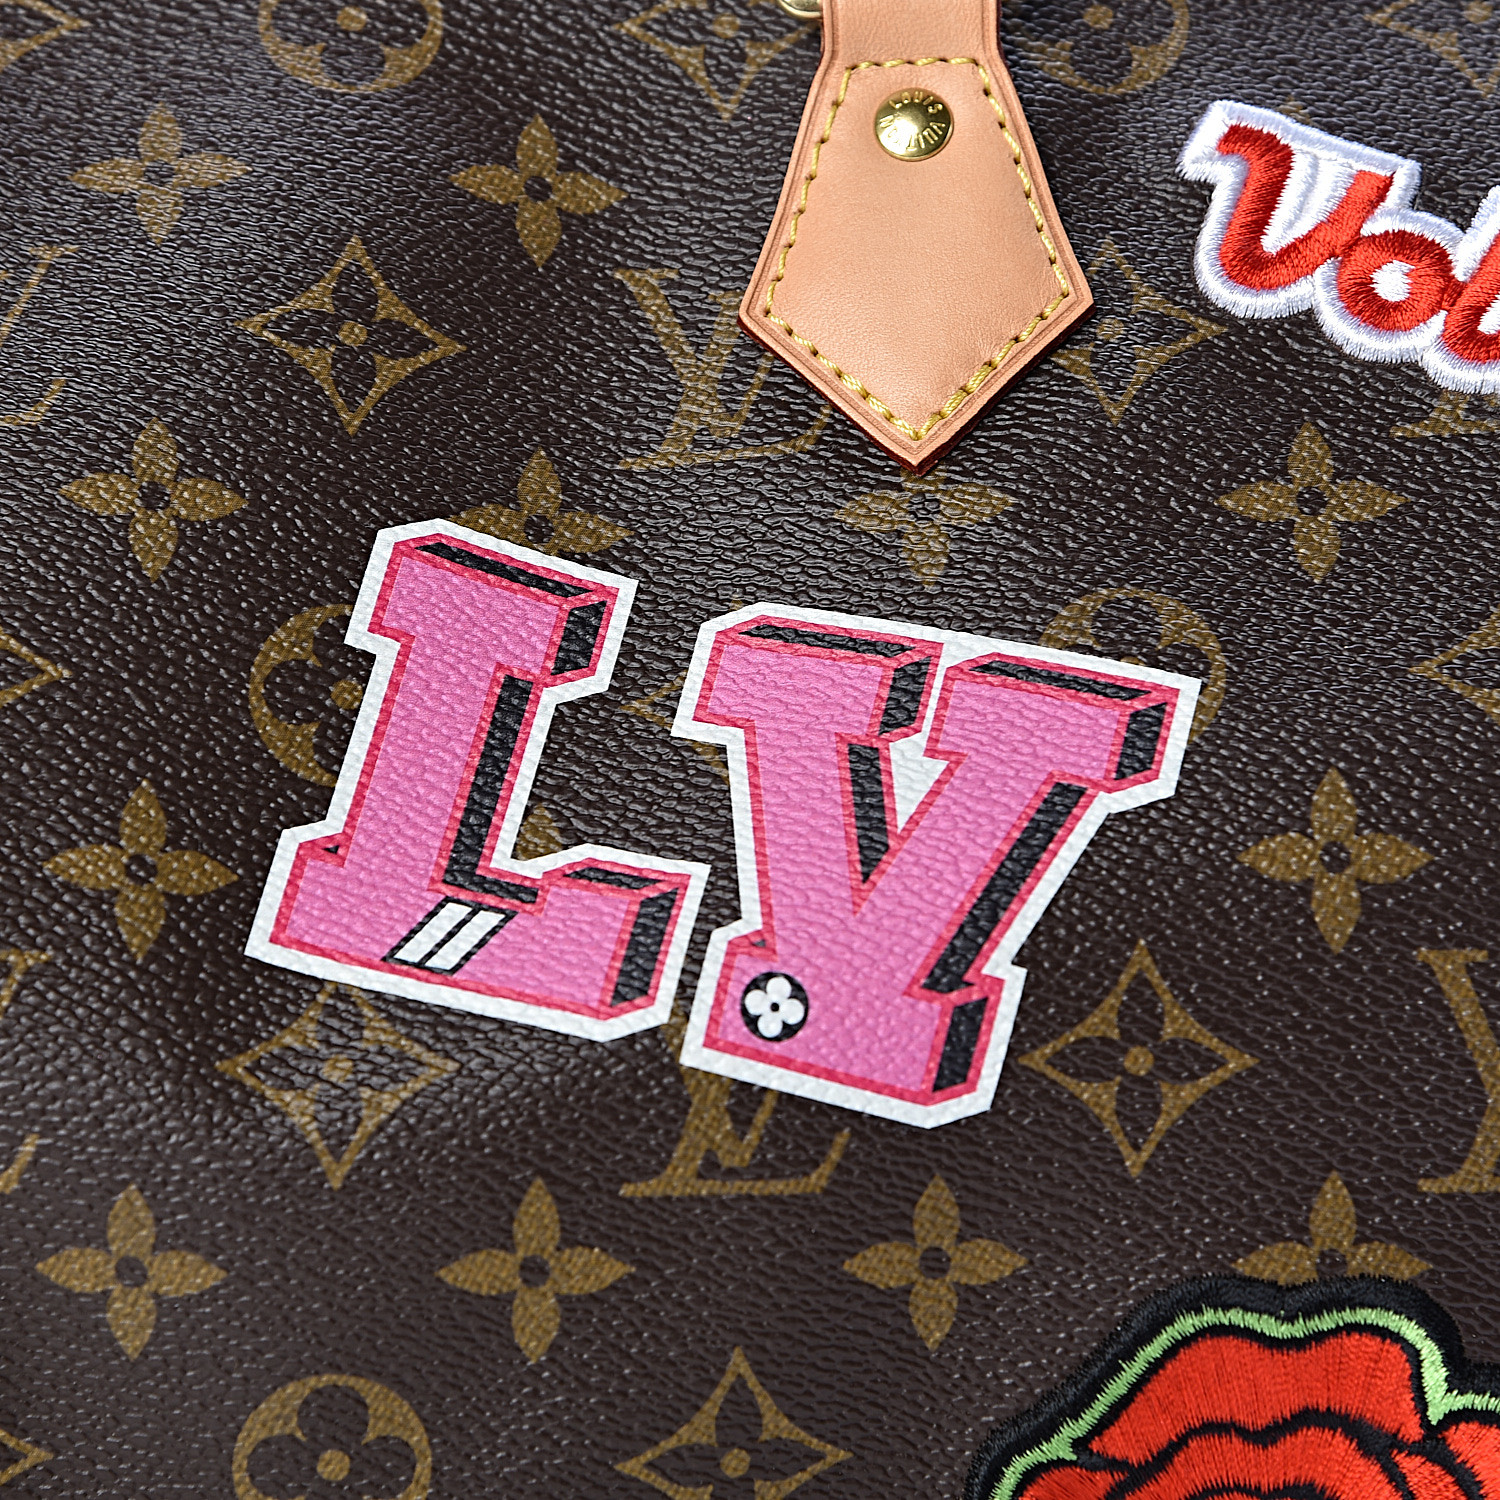 LOUIS VUITTON  PATCHES SPEEDY 30 BANDOULIERE OF